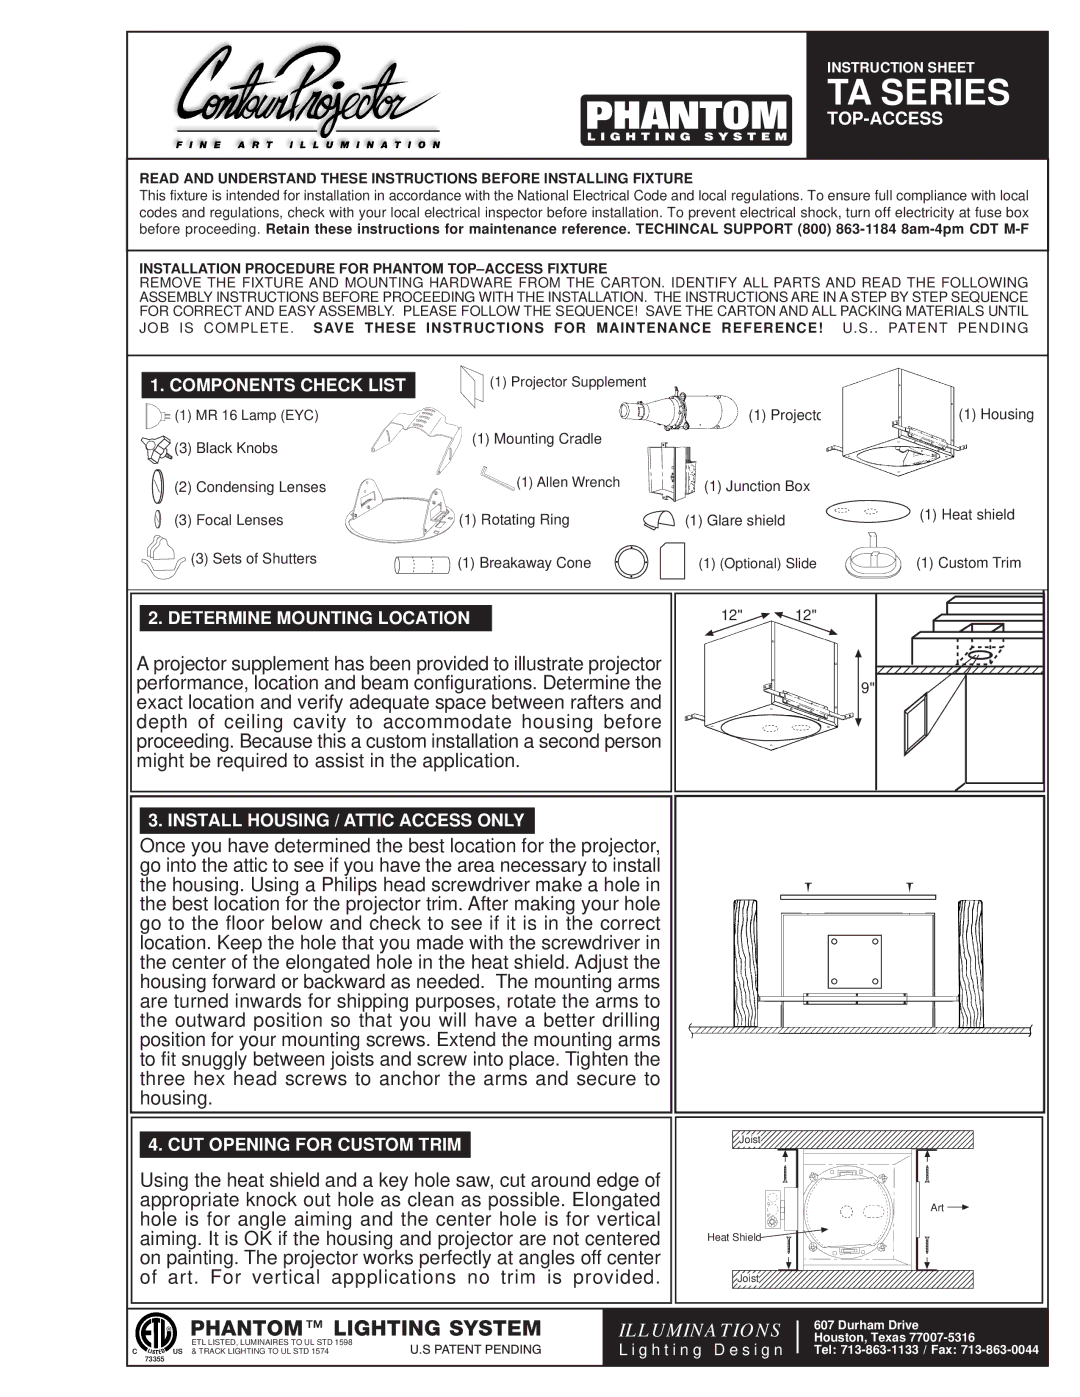 Phantom Tech Projector instruction sheet Top-Access, Components Check List, Determine Mounting Location 